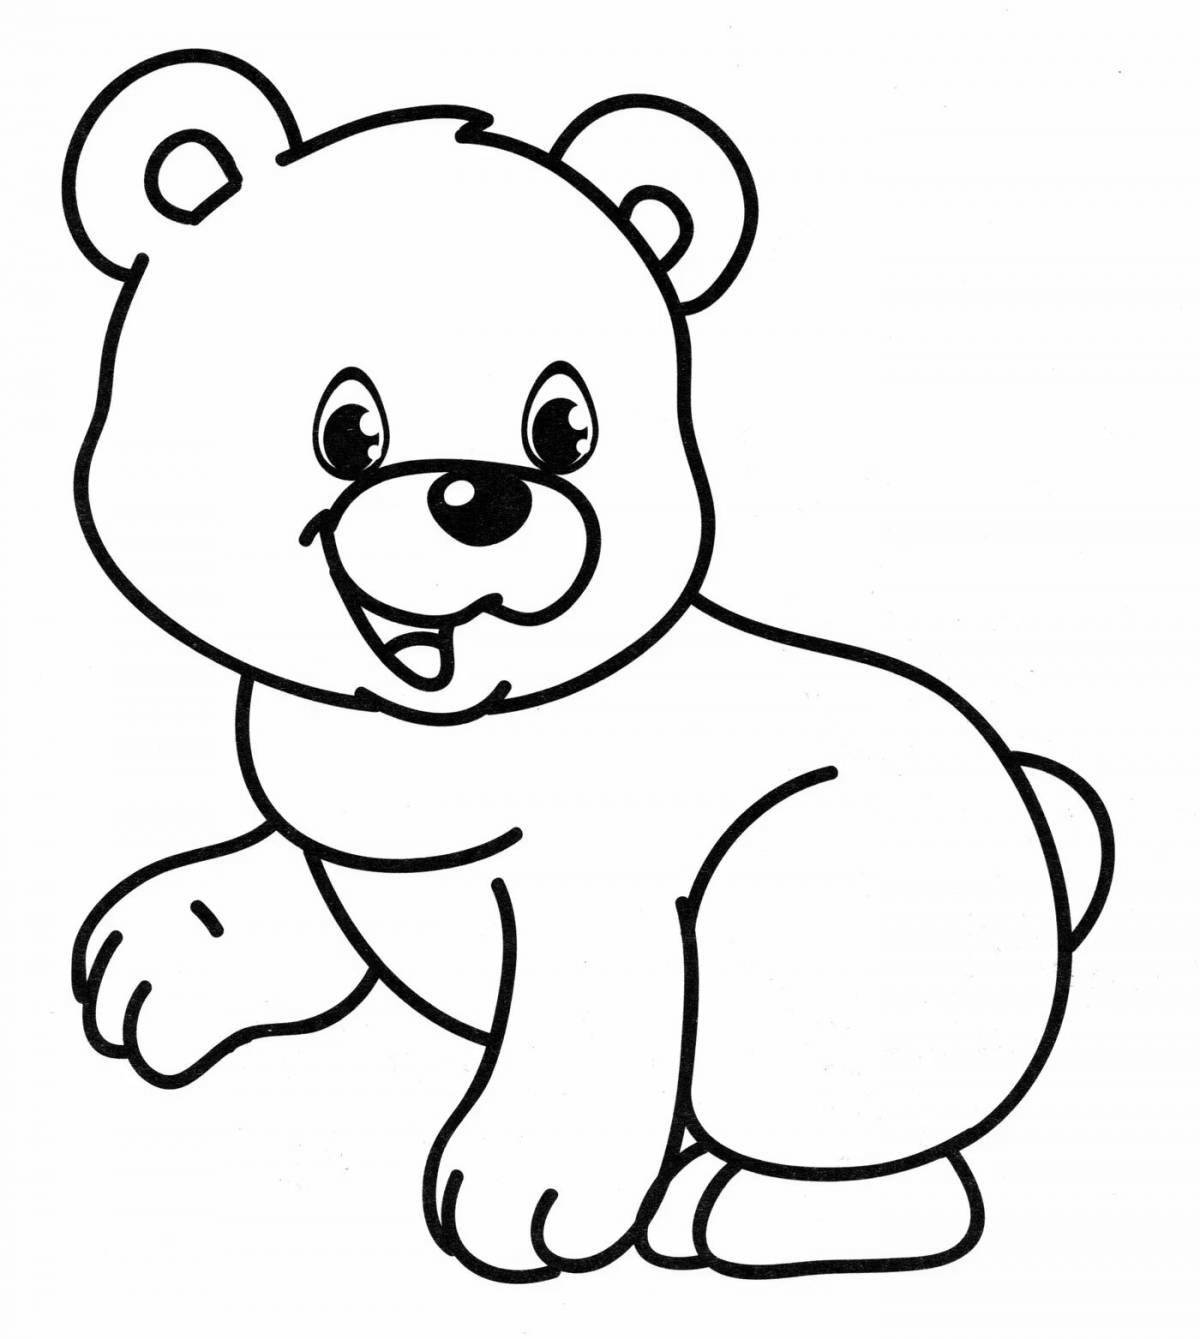 Colorful teddy bear coloring page